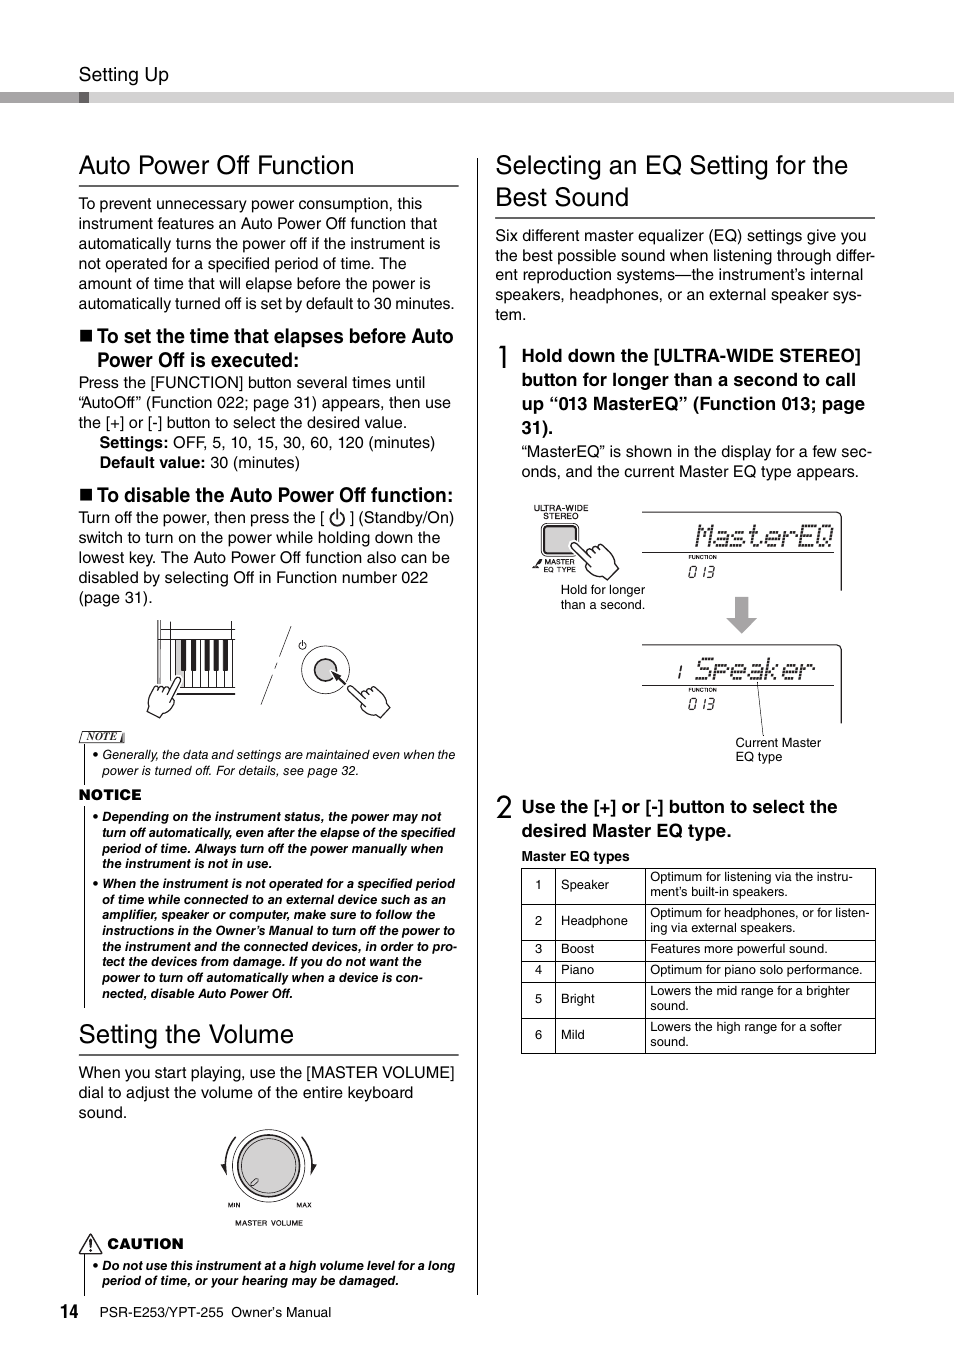 Auto power off function, Setting the volume, Selecting an eq setting for the best sound | Mastereq speaker | Yamaha PSR-E253 User Manual | Page 14 / 48